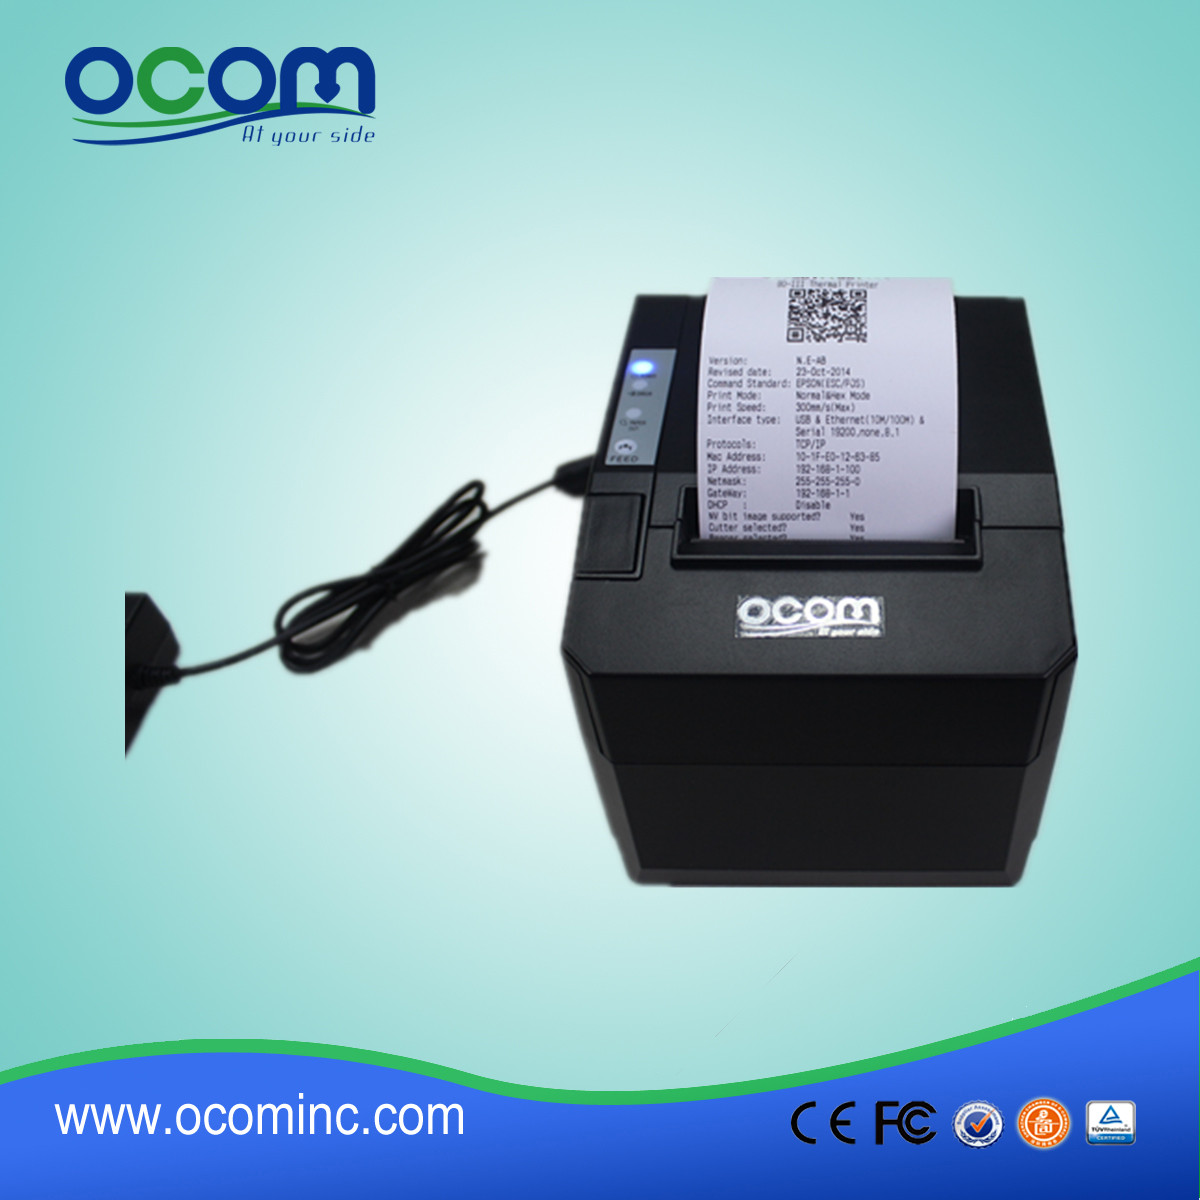 80mm Pos android bluetooth thermal printer